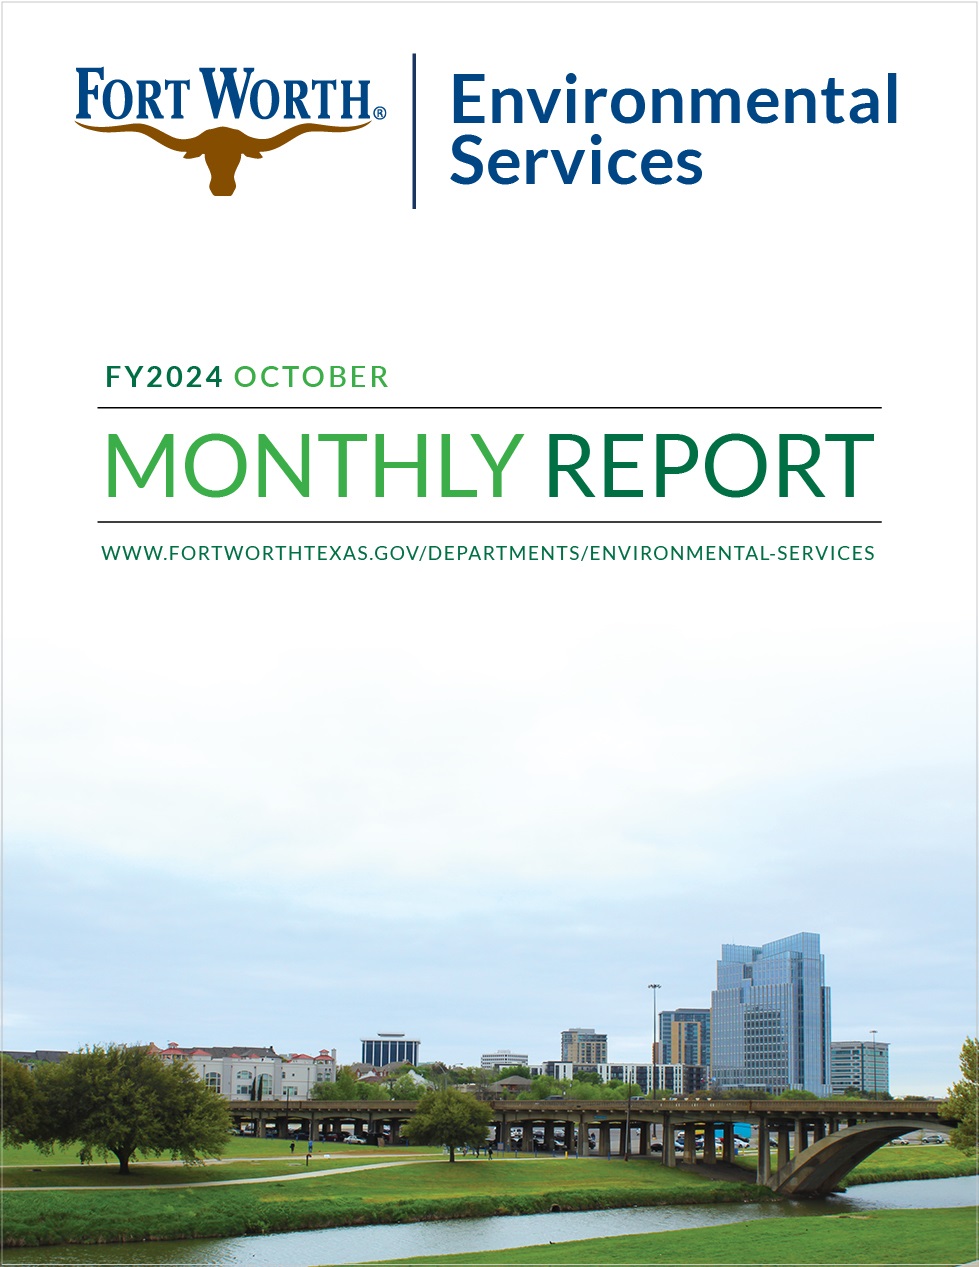 environmental-services-monthly-report-thumb-2024.jpg